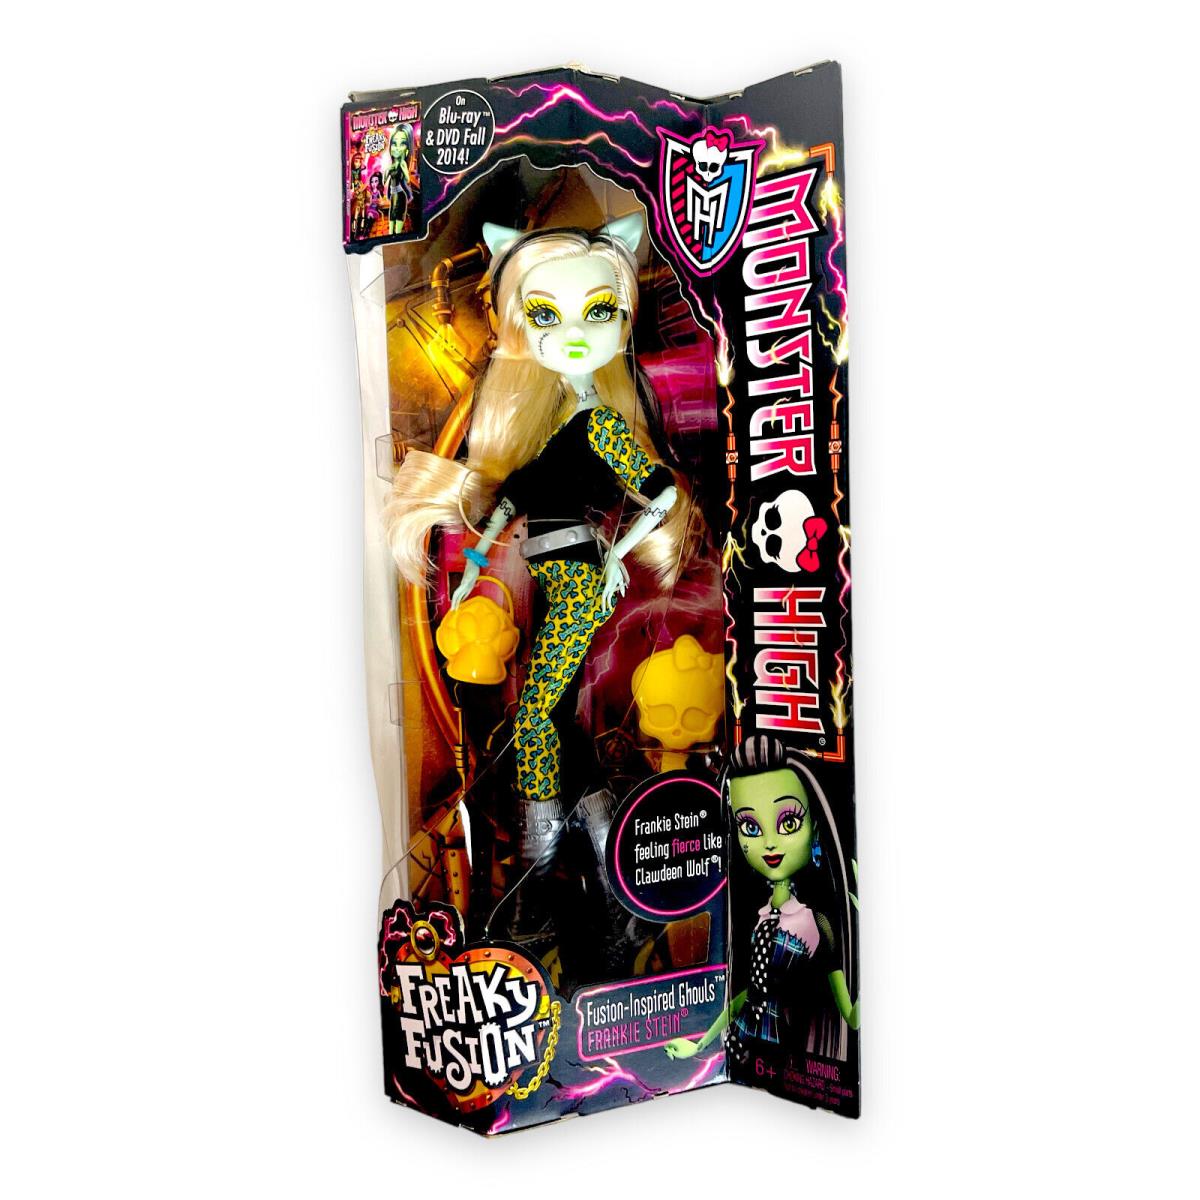 Monster High Frankie Stein Doll Freaky Fusion Inspired Ghouls 2013